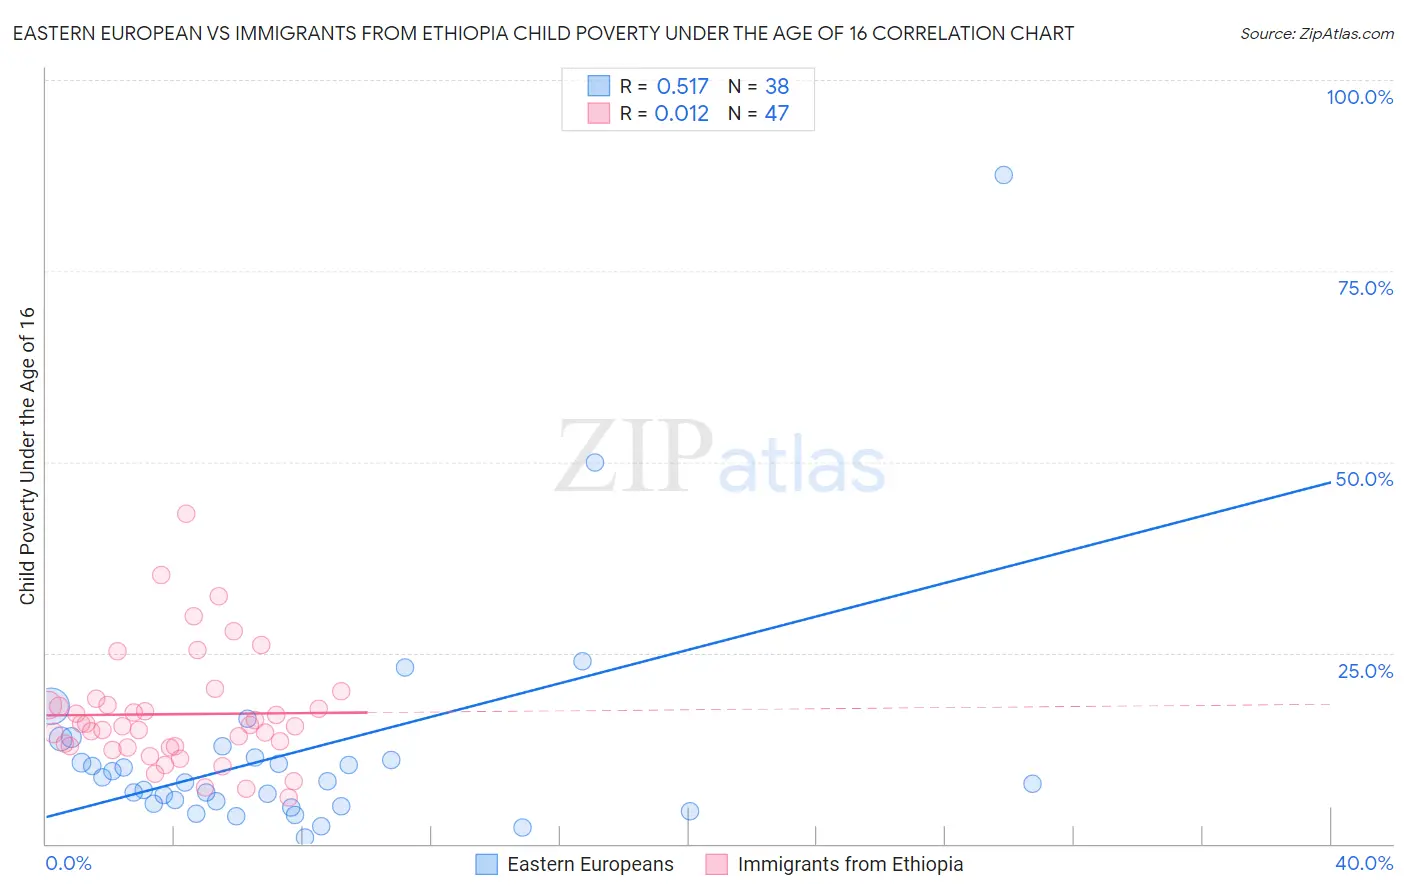 Eastern European vs Immigrants from Ethiopia Child Poverty Under the Age of 16